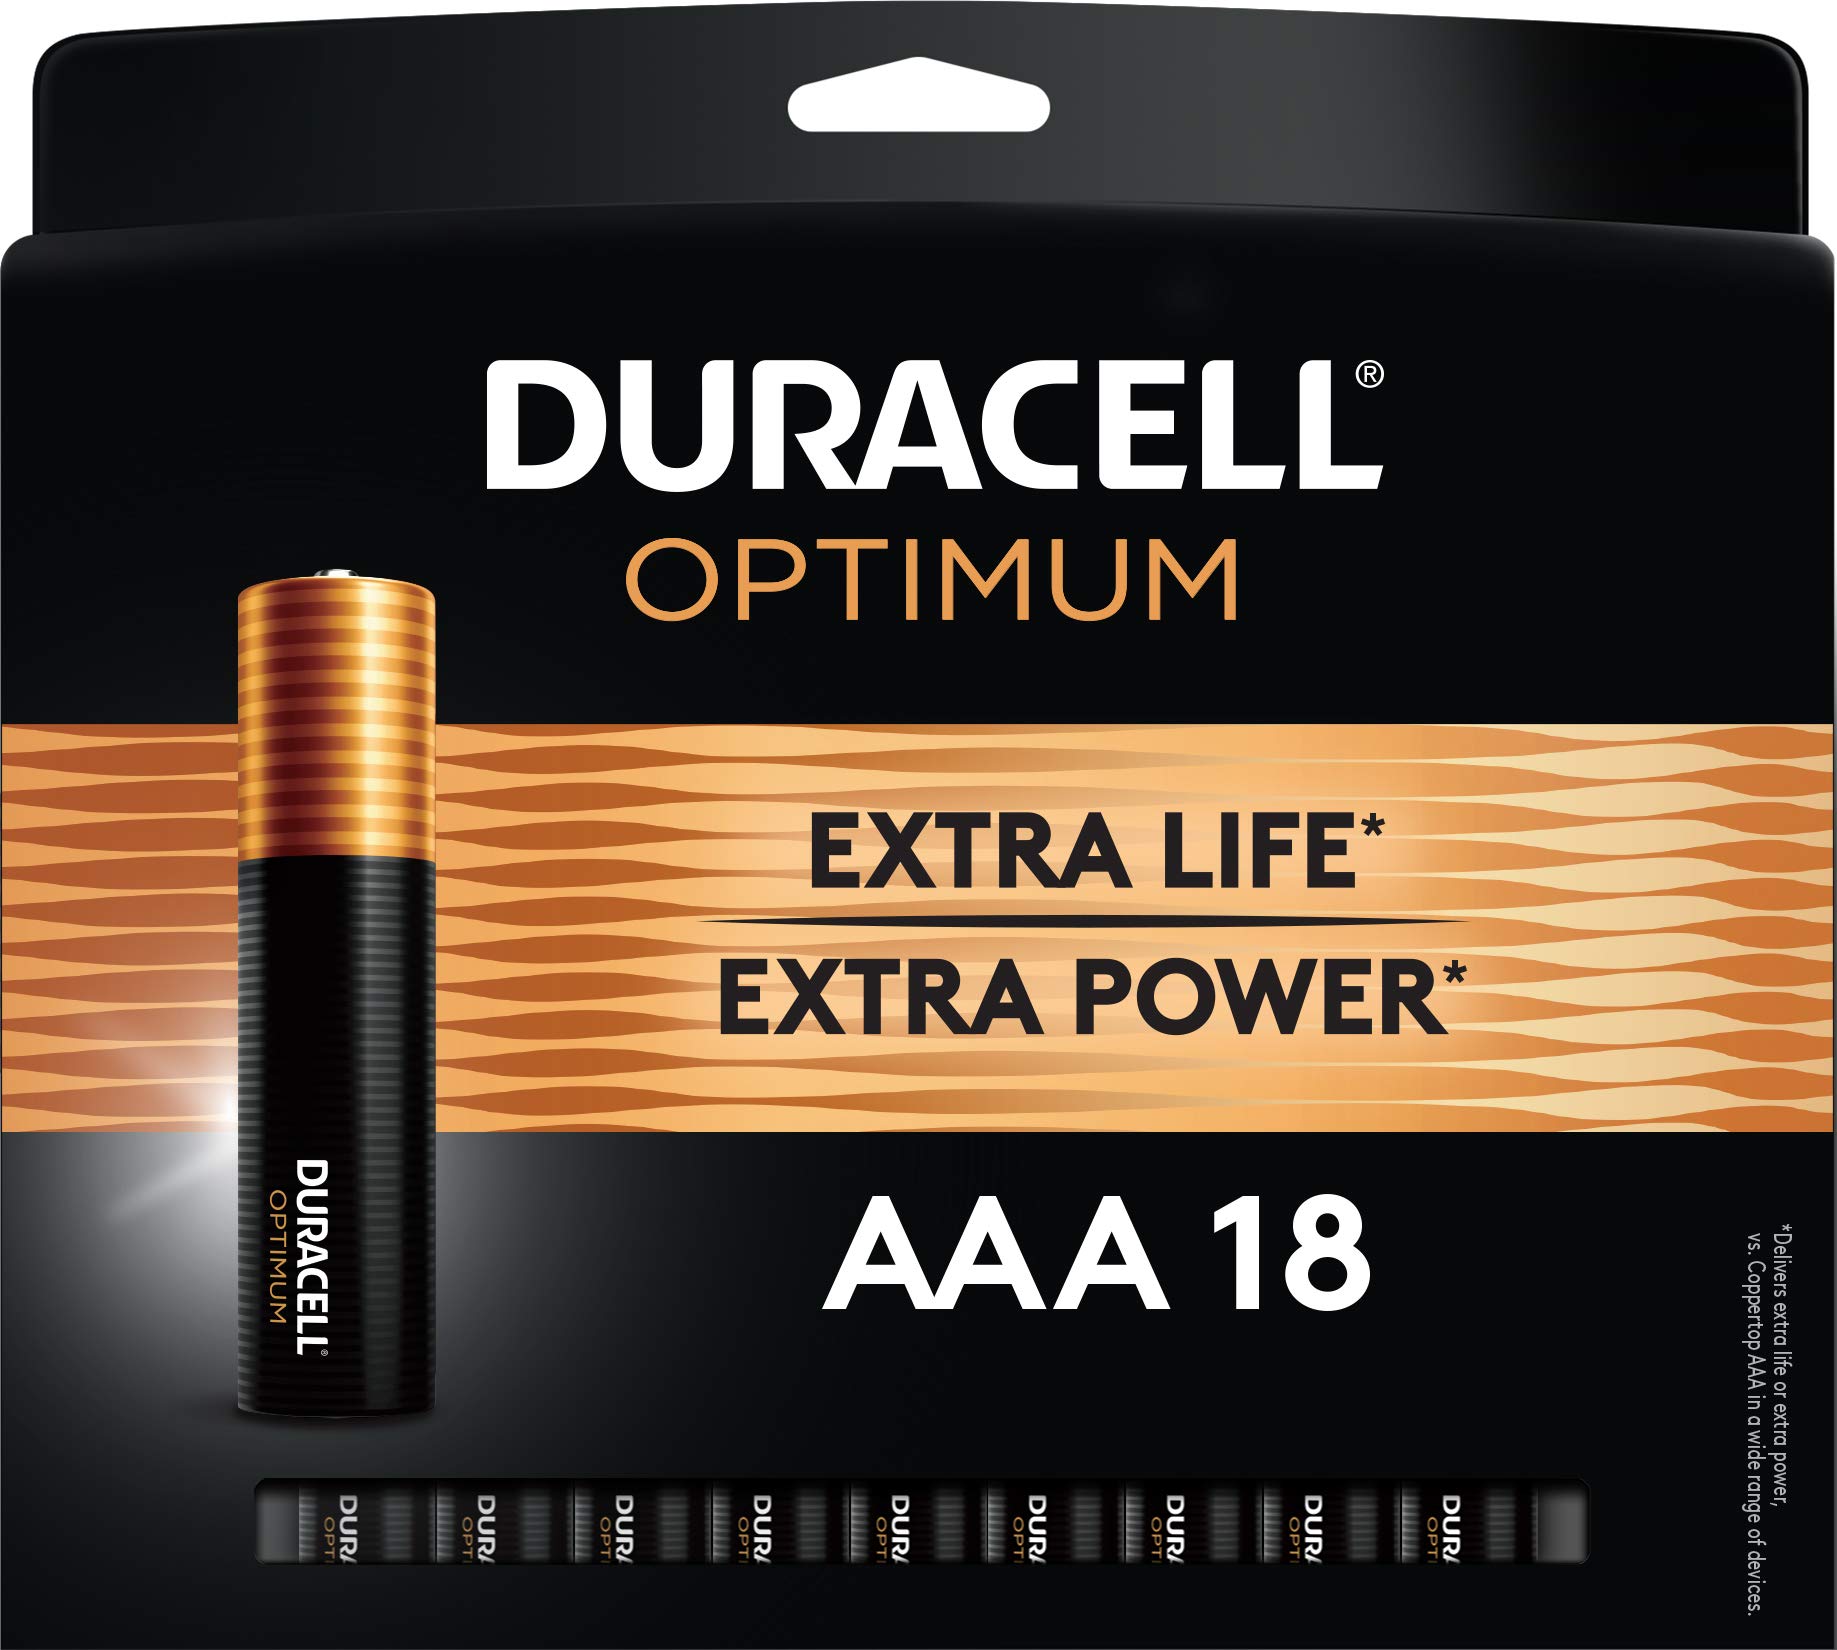 Duracell OptiDuracell Optimum AAA Batteries Ideal for Household and Office Devices